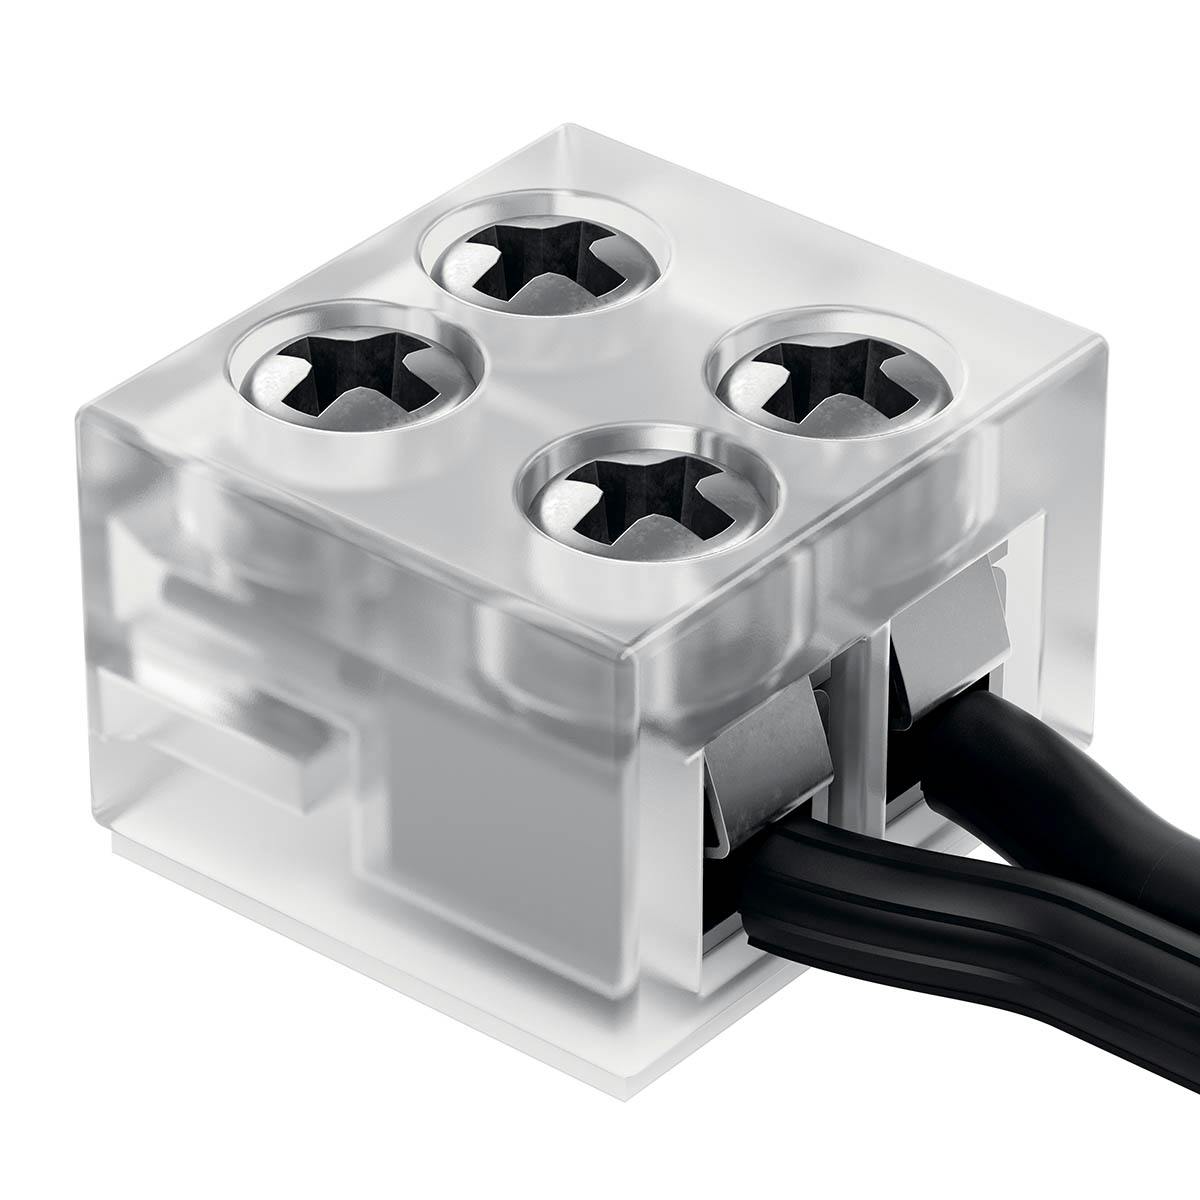 Tape to Supply Terminal Block Connector on a white background